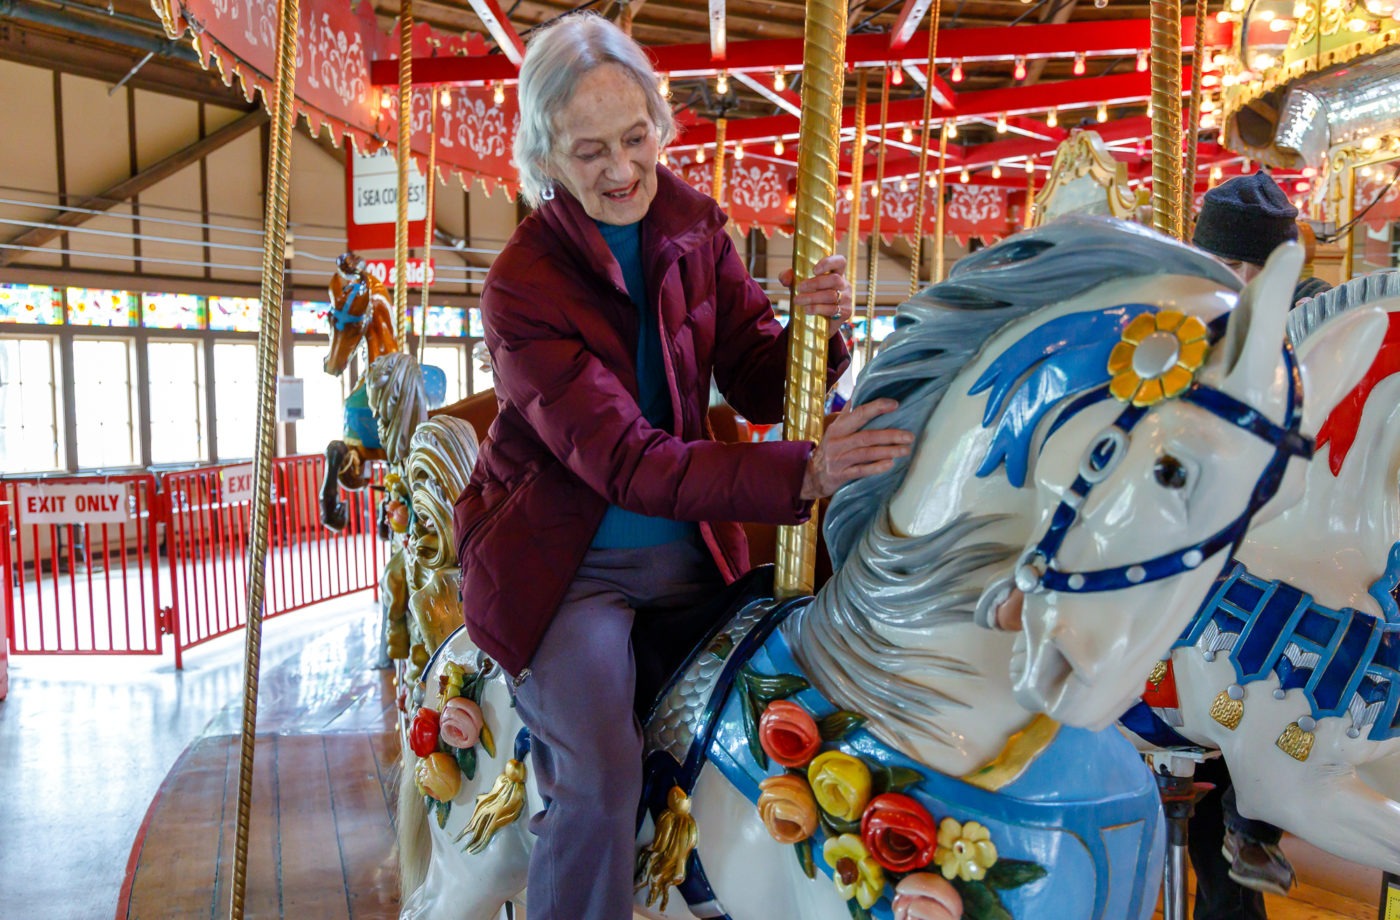 The carousel that made people happy